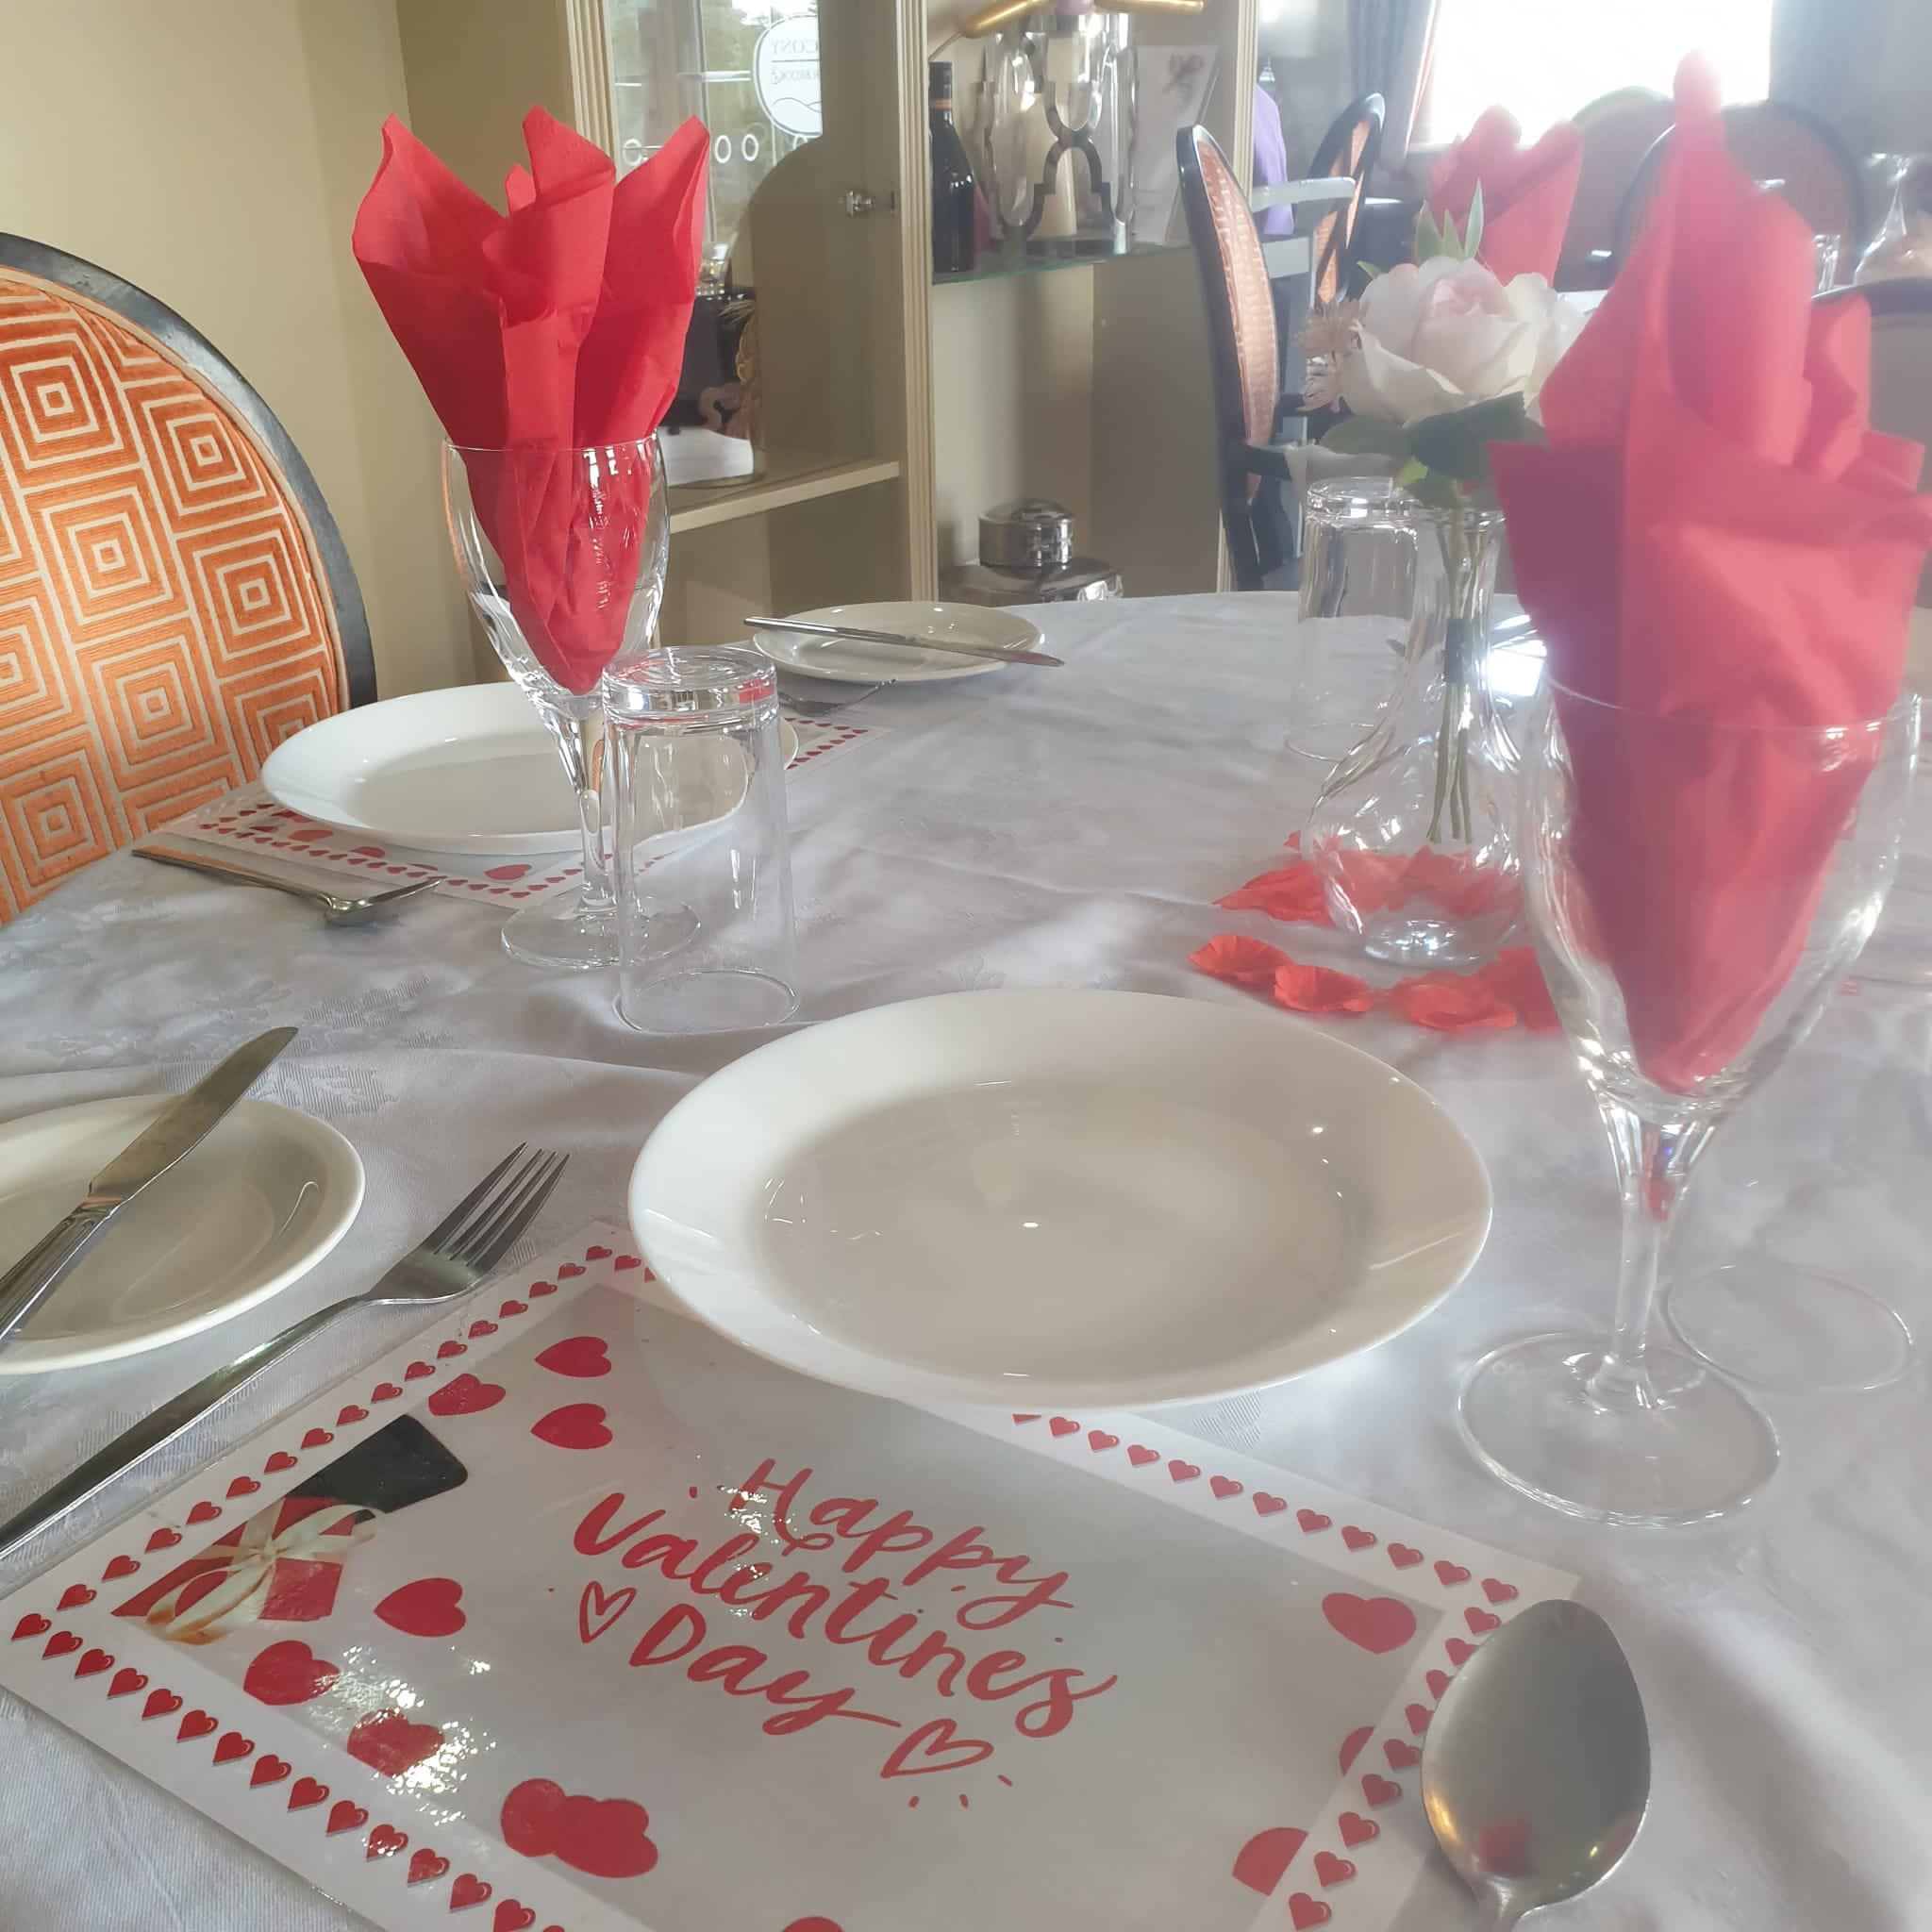 Table decorations for Valentines Day at The Porterbrook Care Home